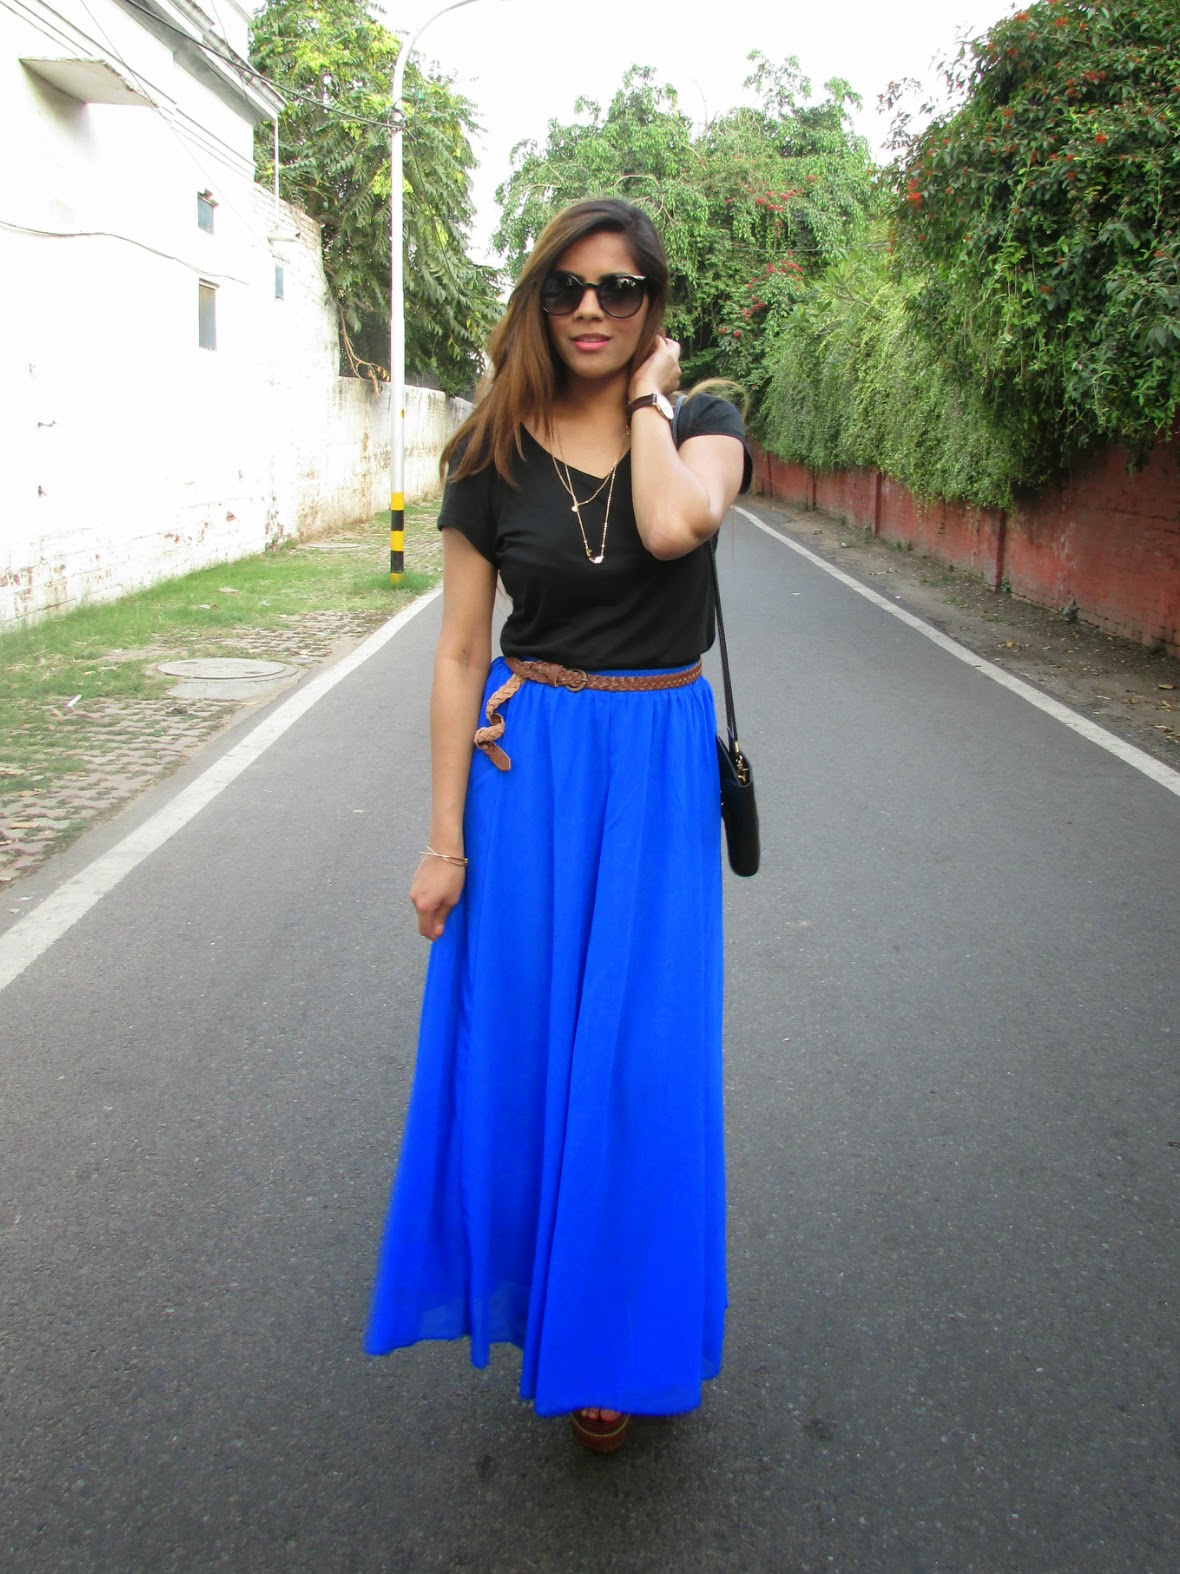   How to style maxi skirt, summer trends 2915, Indian fashion blogger, retro style, cheap maxi skirt online, popbasic, double string necklace, retro outfit, fashion, popbasic review, maxi skirt simple tshirt, maxi skirt of petites, how to look tall in maxi skirt, ombre haie, best hair color for summers, summer hair, maxi skirt for short people, blue maxi skirt, summer jewelry trends 2015, spring fashion trends 2015, beauty , fashion,beauty and fashion,beauty blog, fashion blog , indian beauty blog,indian fashion blog, beauty and fashion blog, indian beauty and fashion blog, indian bloggers, indian beauty bloggers, indian fashion bloggers,indian bloggers online, top 10 indian bloggers, top indian bloggers,top 10 fashion bloggers, indian bloggers on blogspot,home remedies, how to